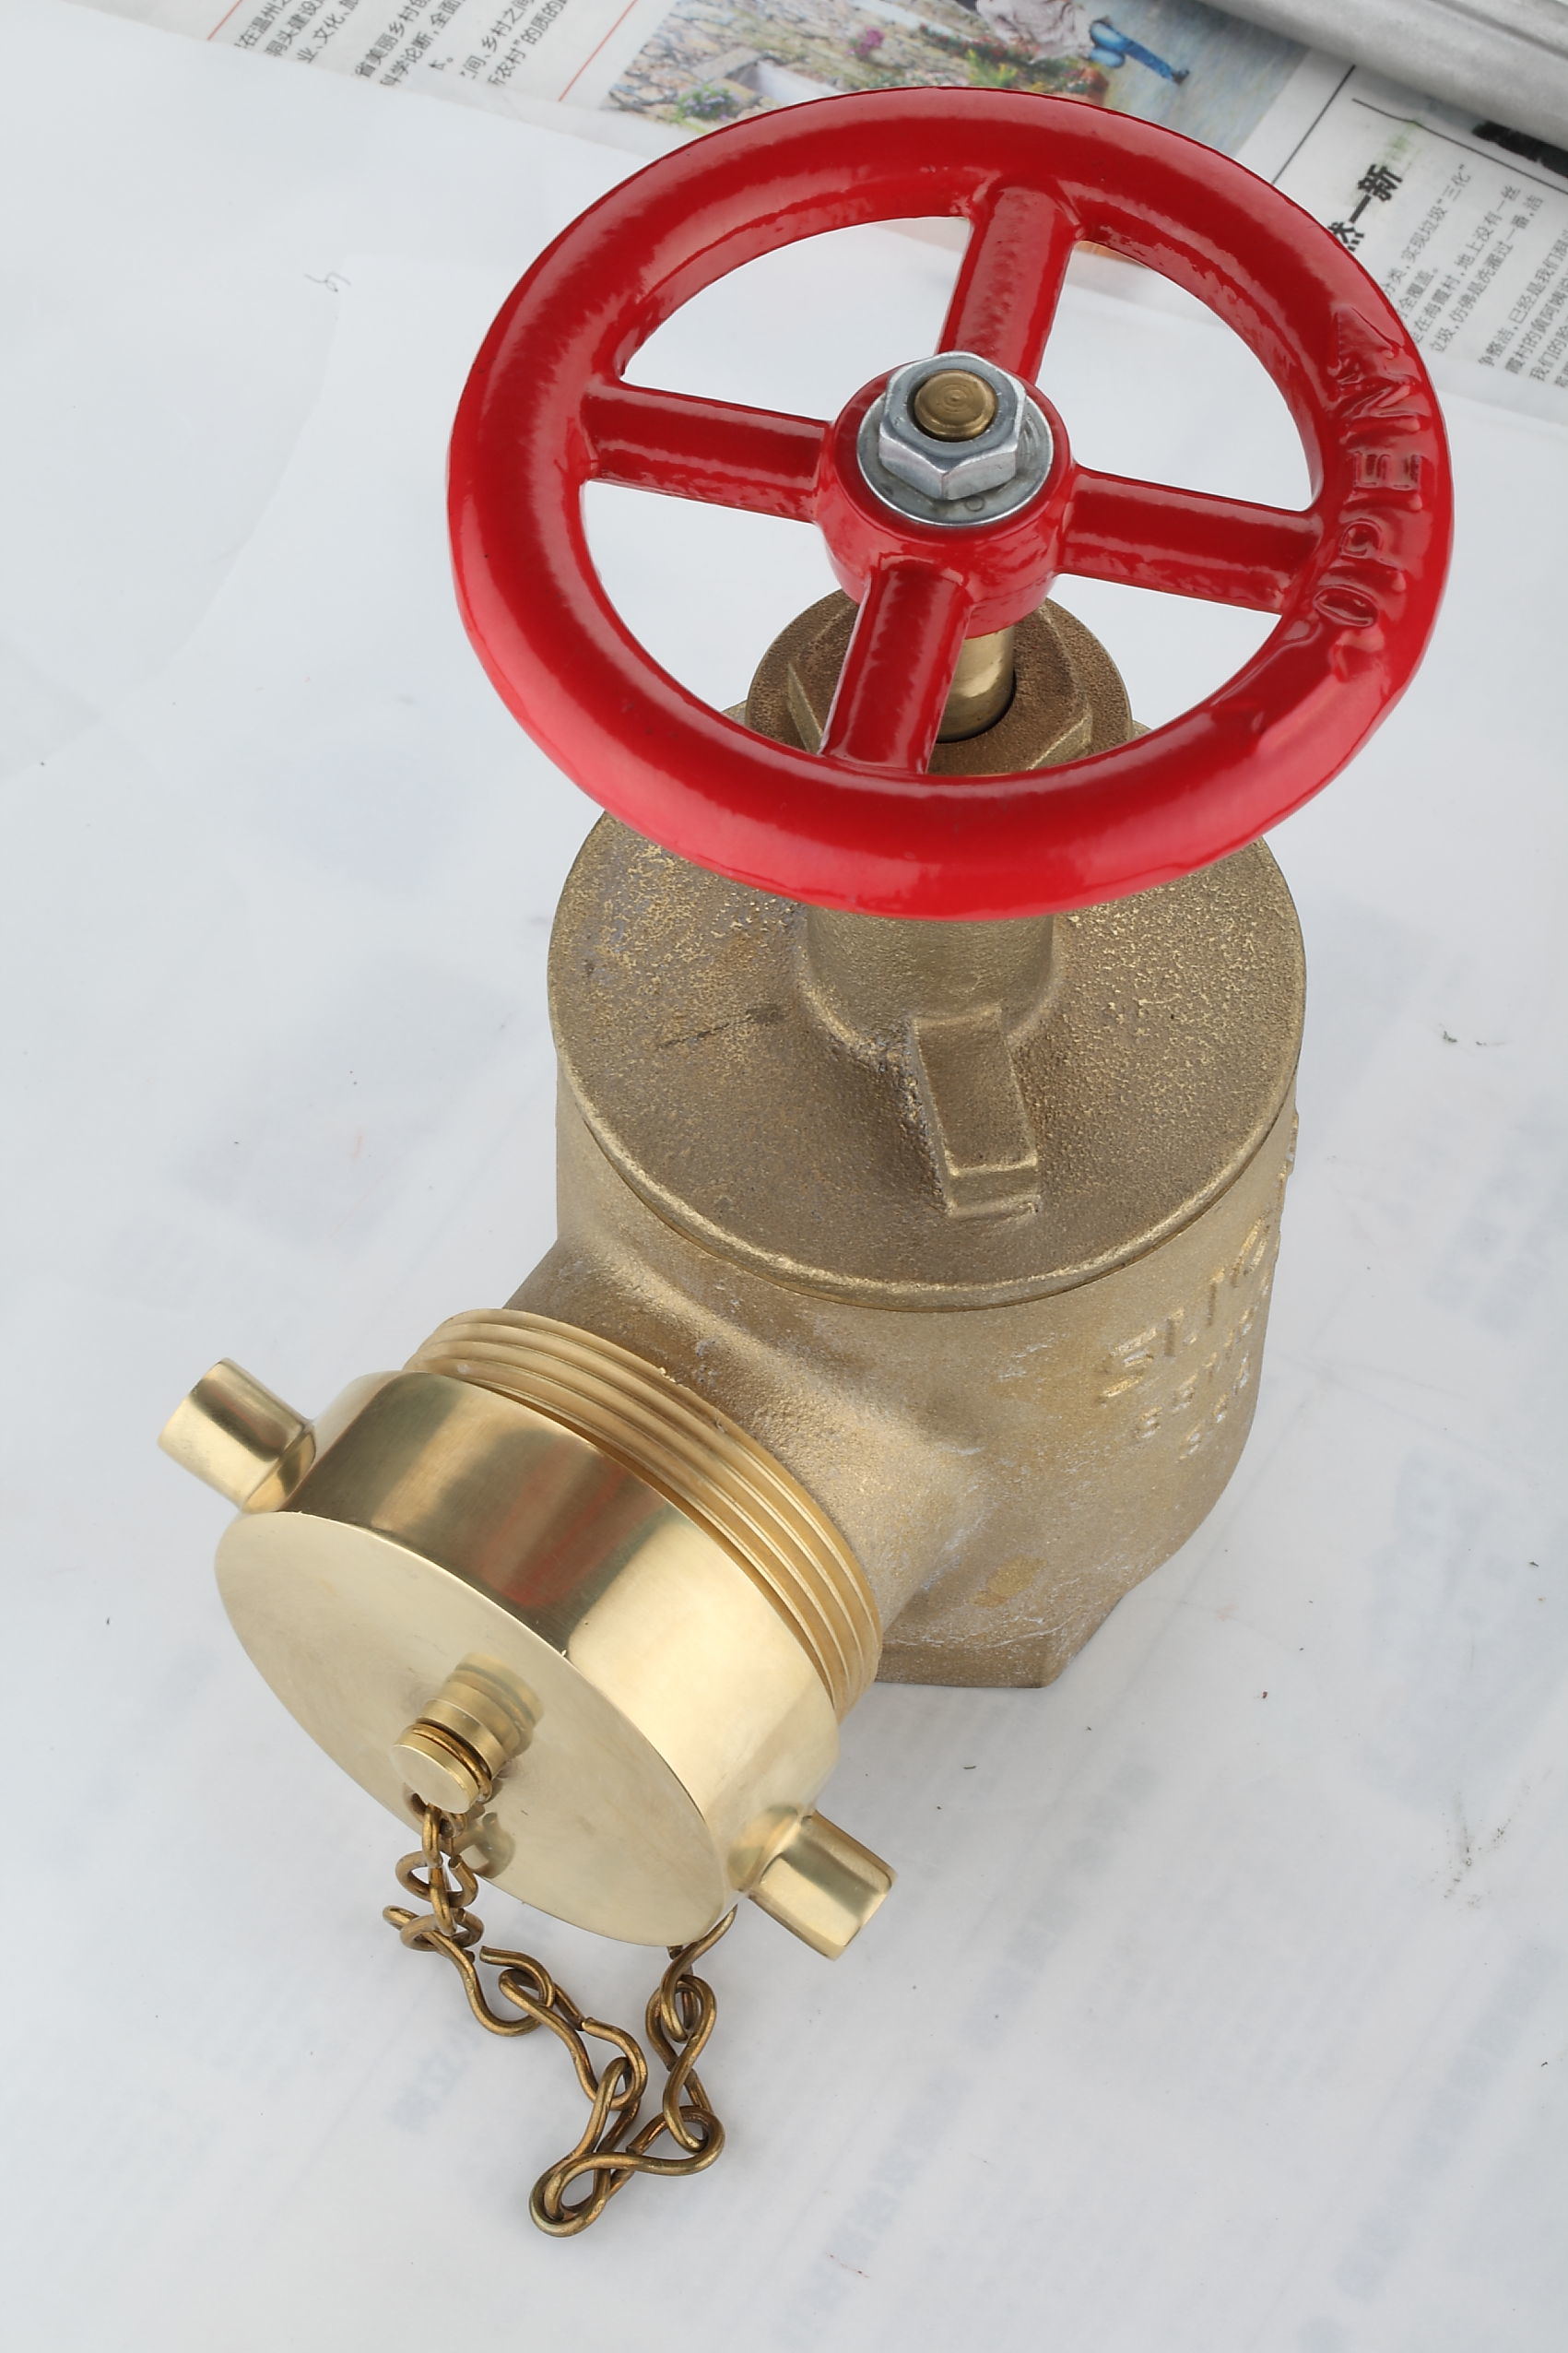 Certificated 2 1/2" angle hose valve male thread outlet fire Hydrant with caps iron handwheel brass valve for fire fighting